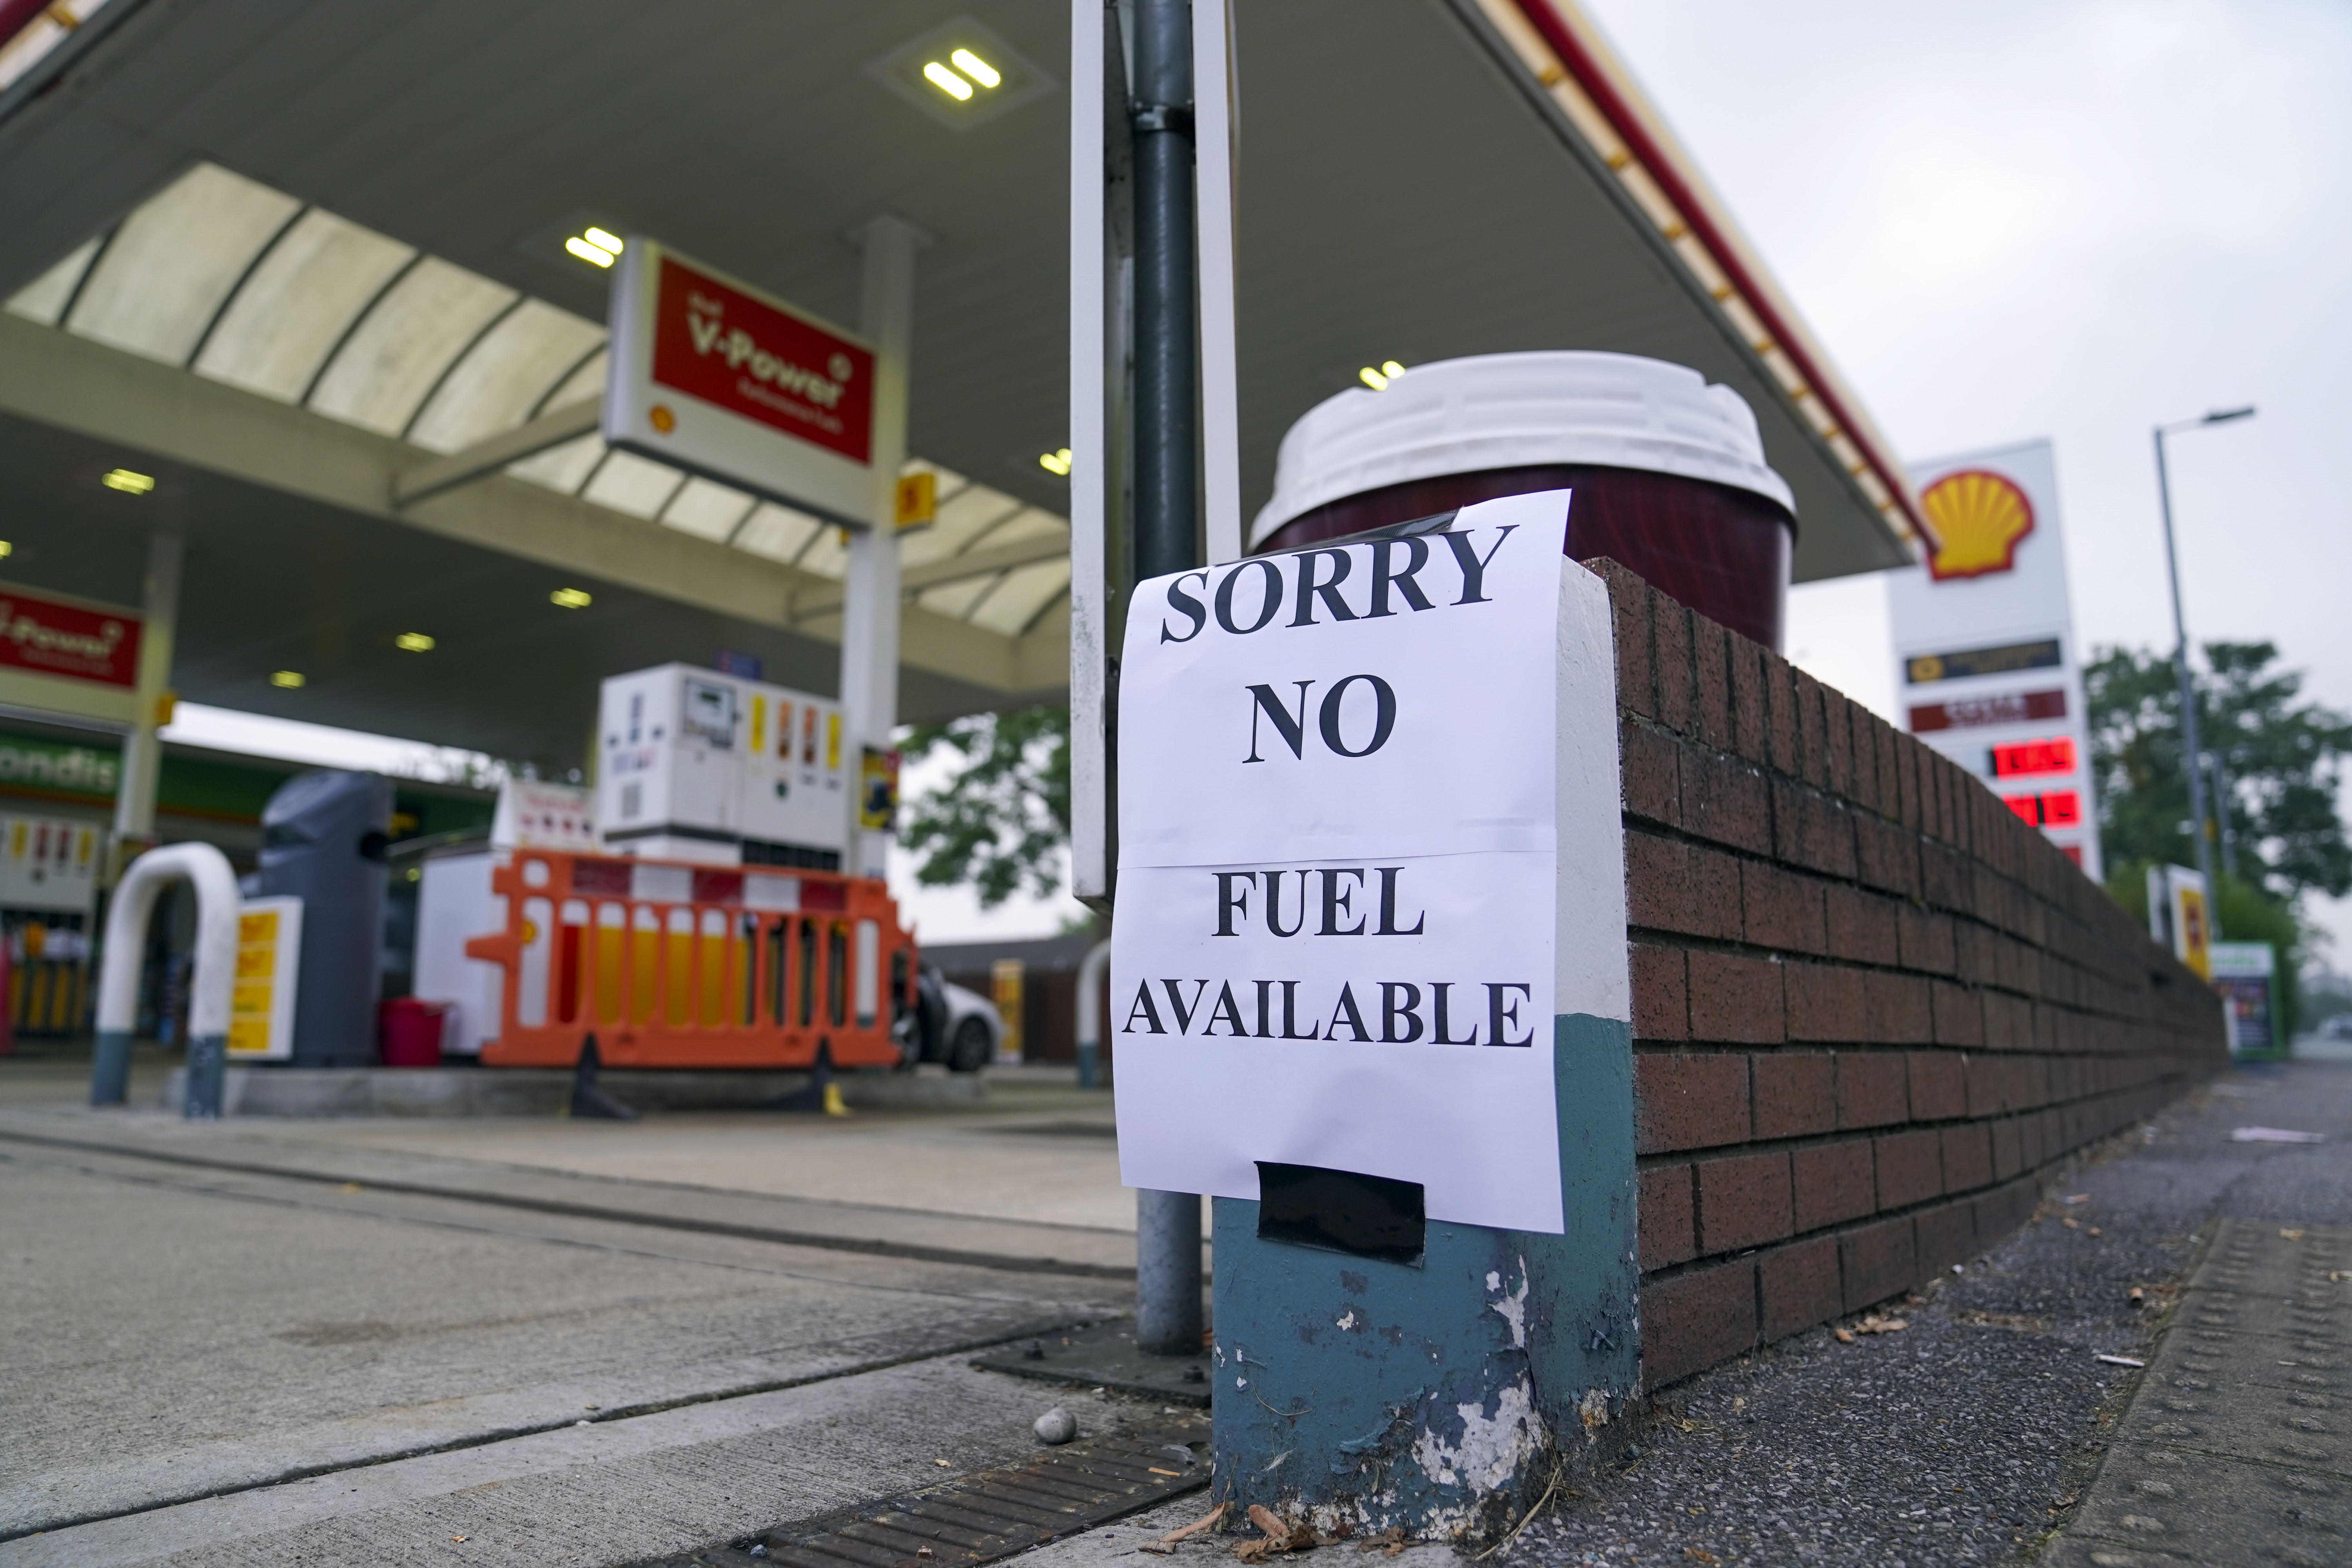 A Shell petrol station in Bracknell, Berkshire, which has no fuel (Steve Parsons/PA)